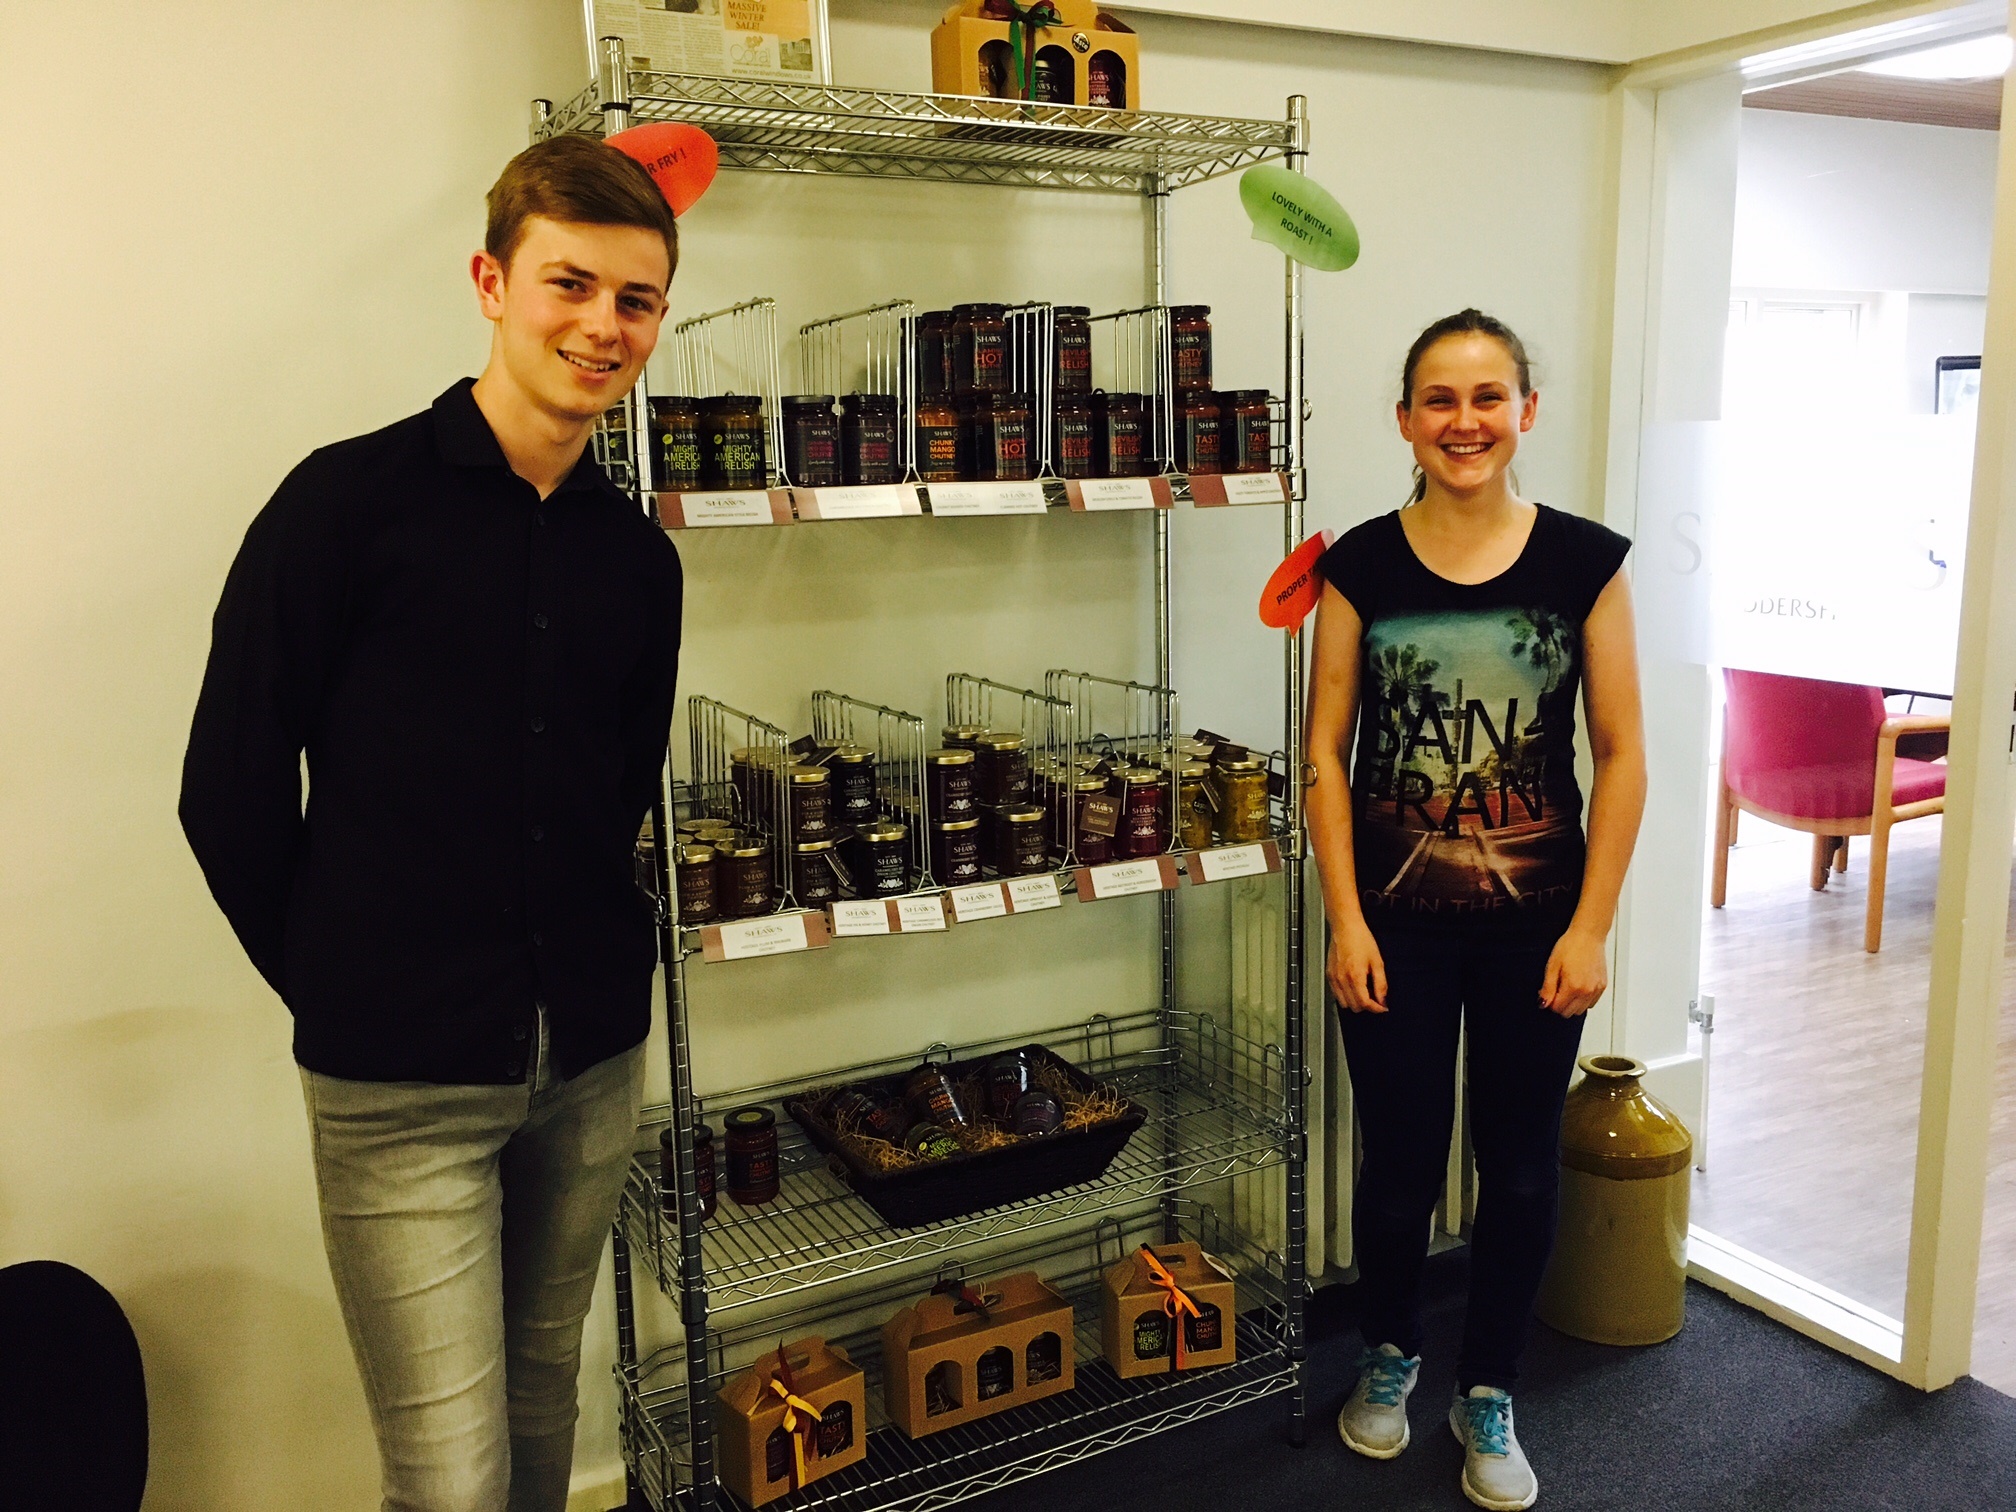 Harrison and Ruby stood next to Shaws chutney jars on their work experience